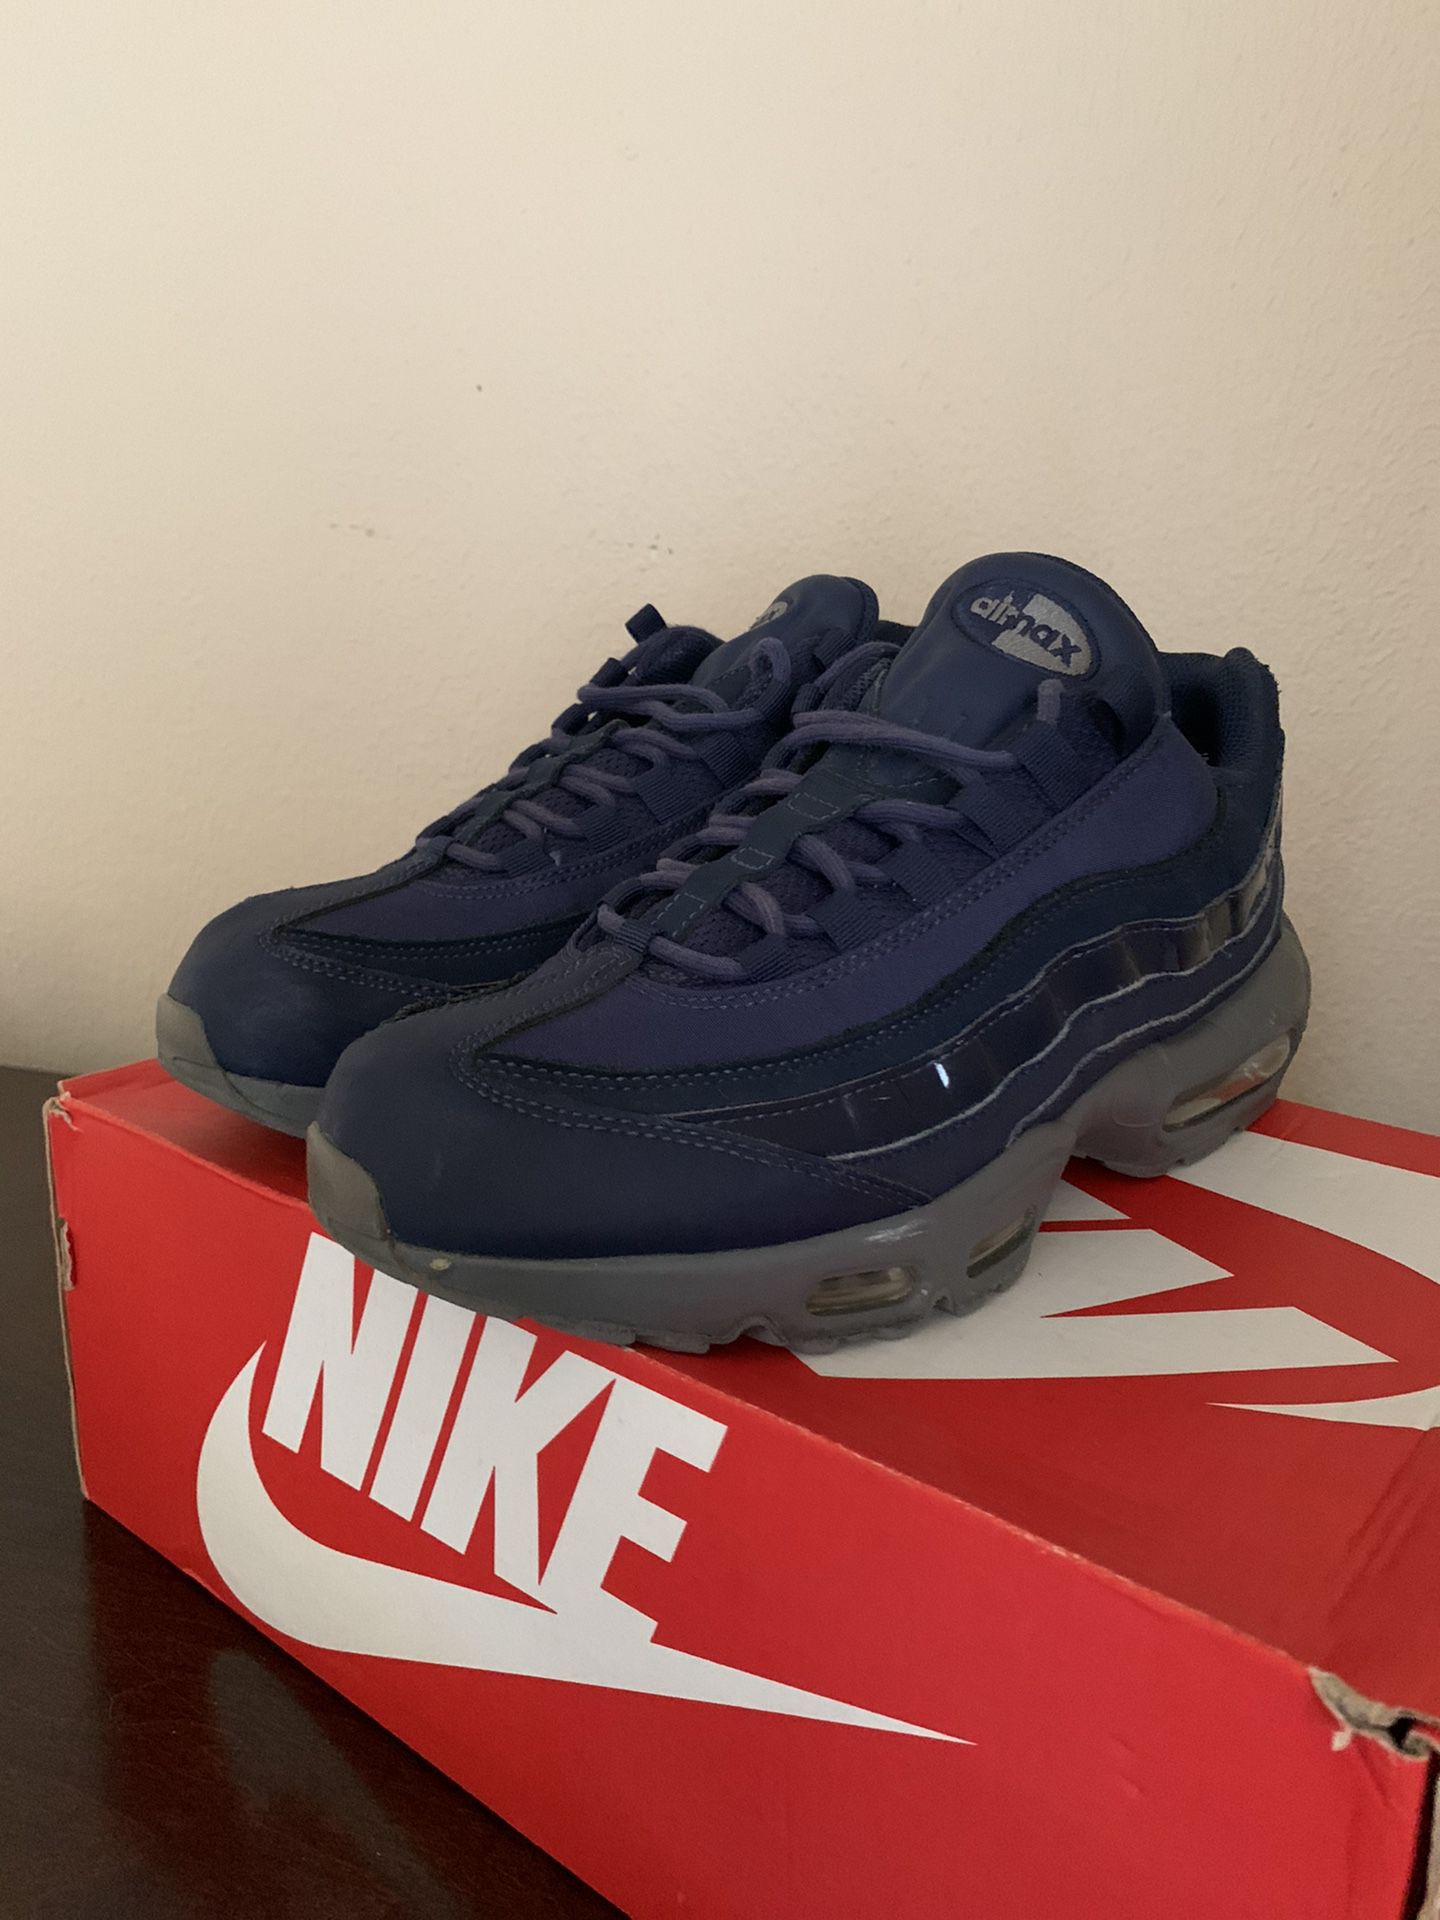 Airmax 95’s Size:9